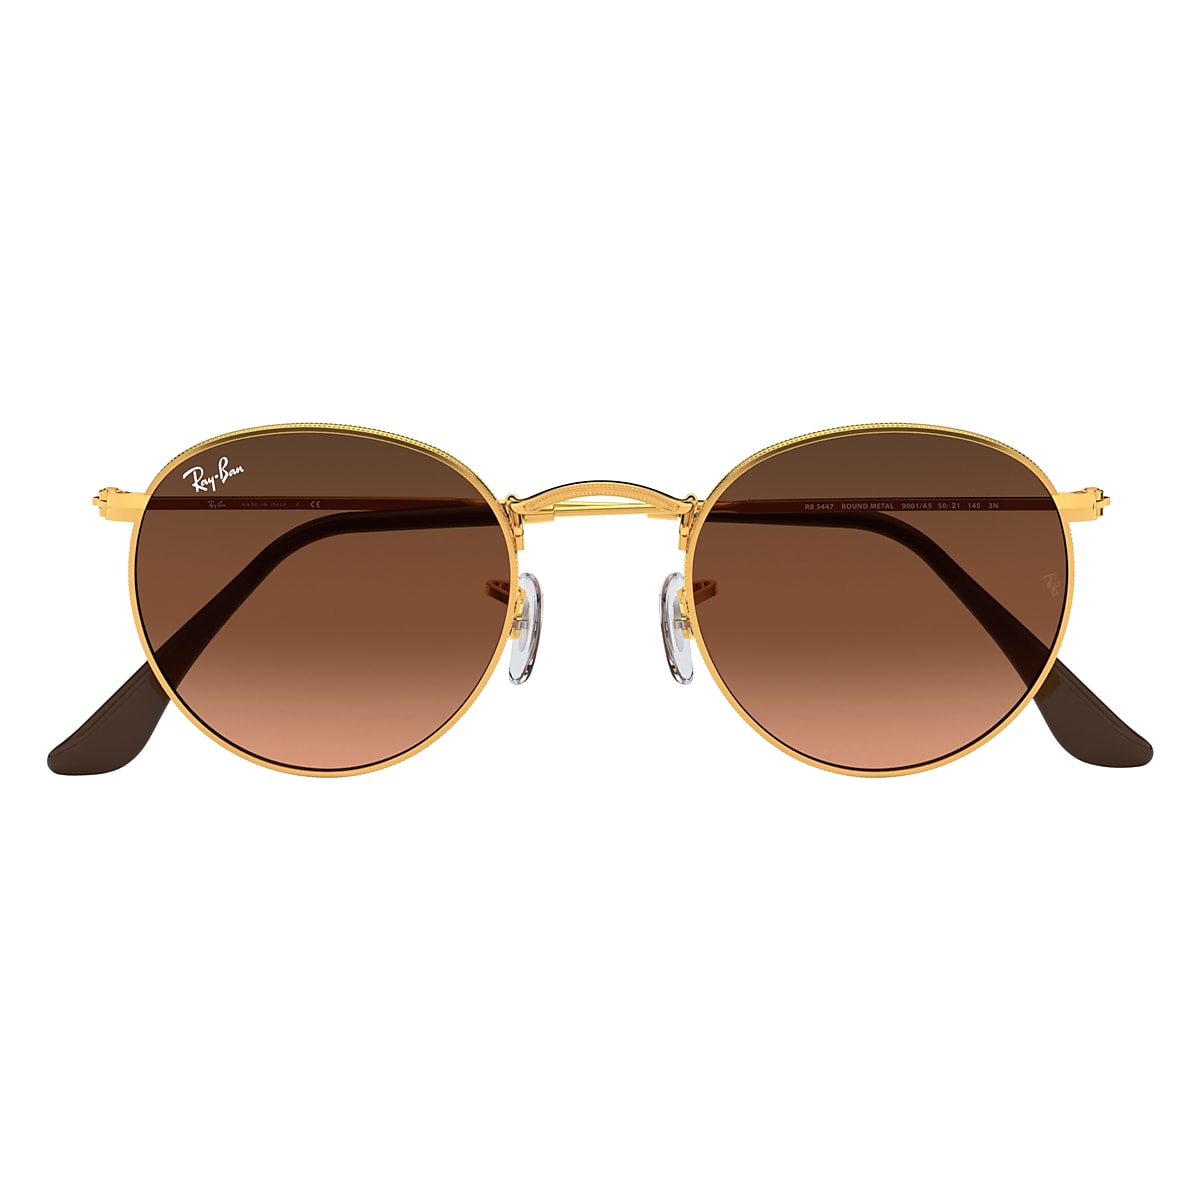 ROUND METAL Sunglasses in Light Bronze and Brown - RB3447 | Ray